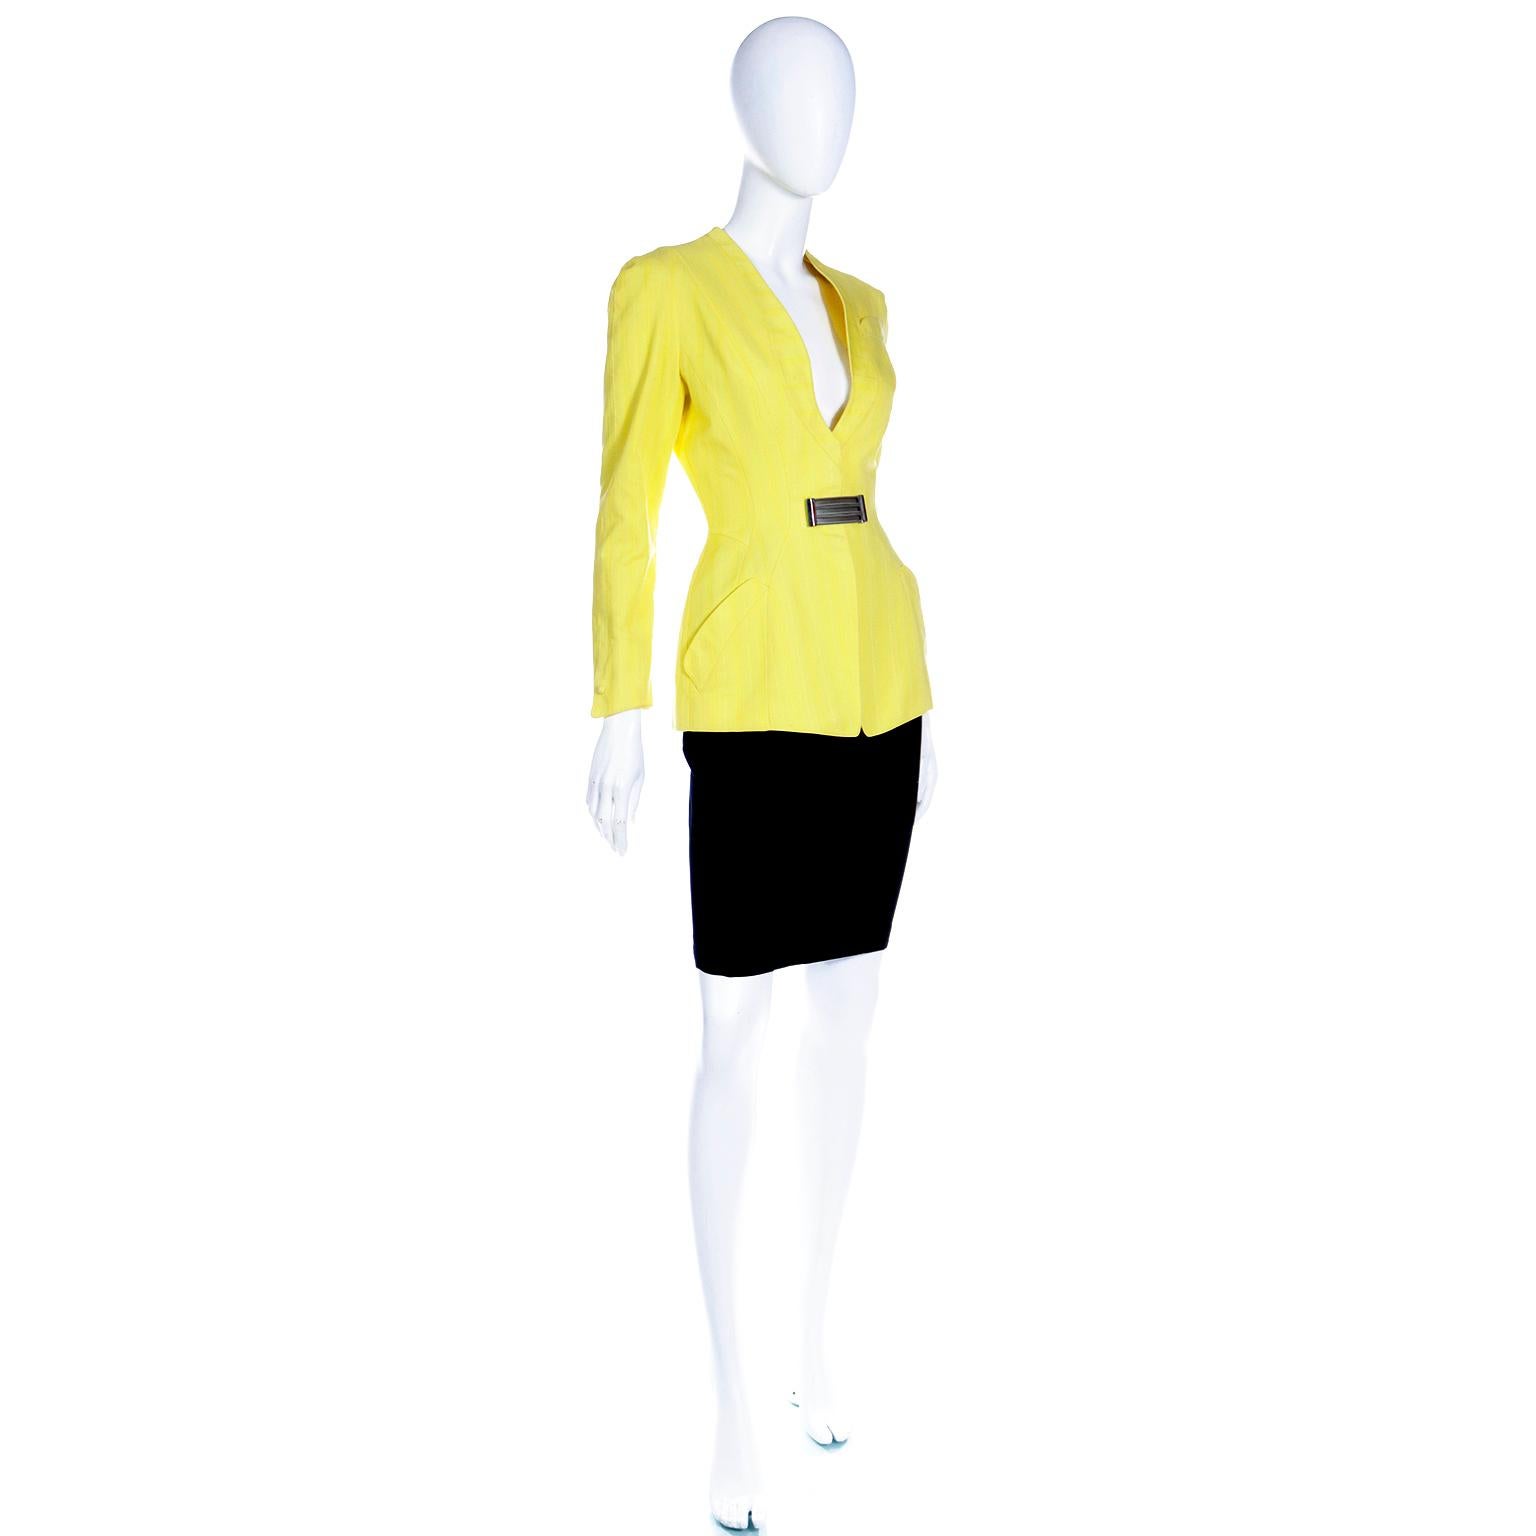 Vintage Thierry Mugler Tonal Striped Yellow Jacket and Black Pencil Skirt Suit In Excellent Condition For Sale In Portland, OR